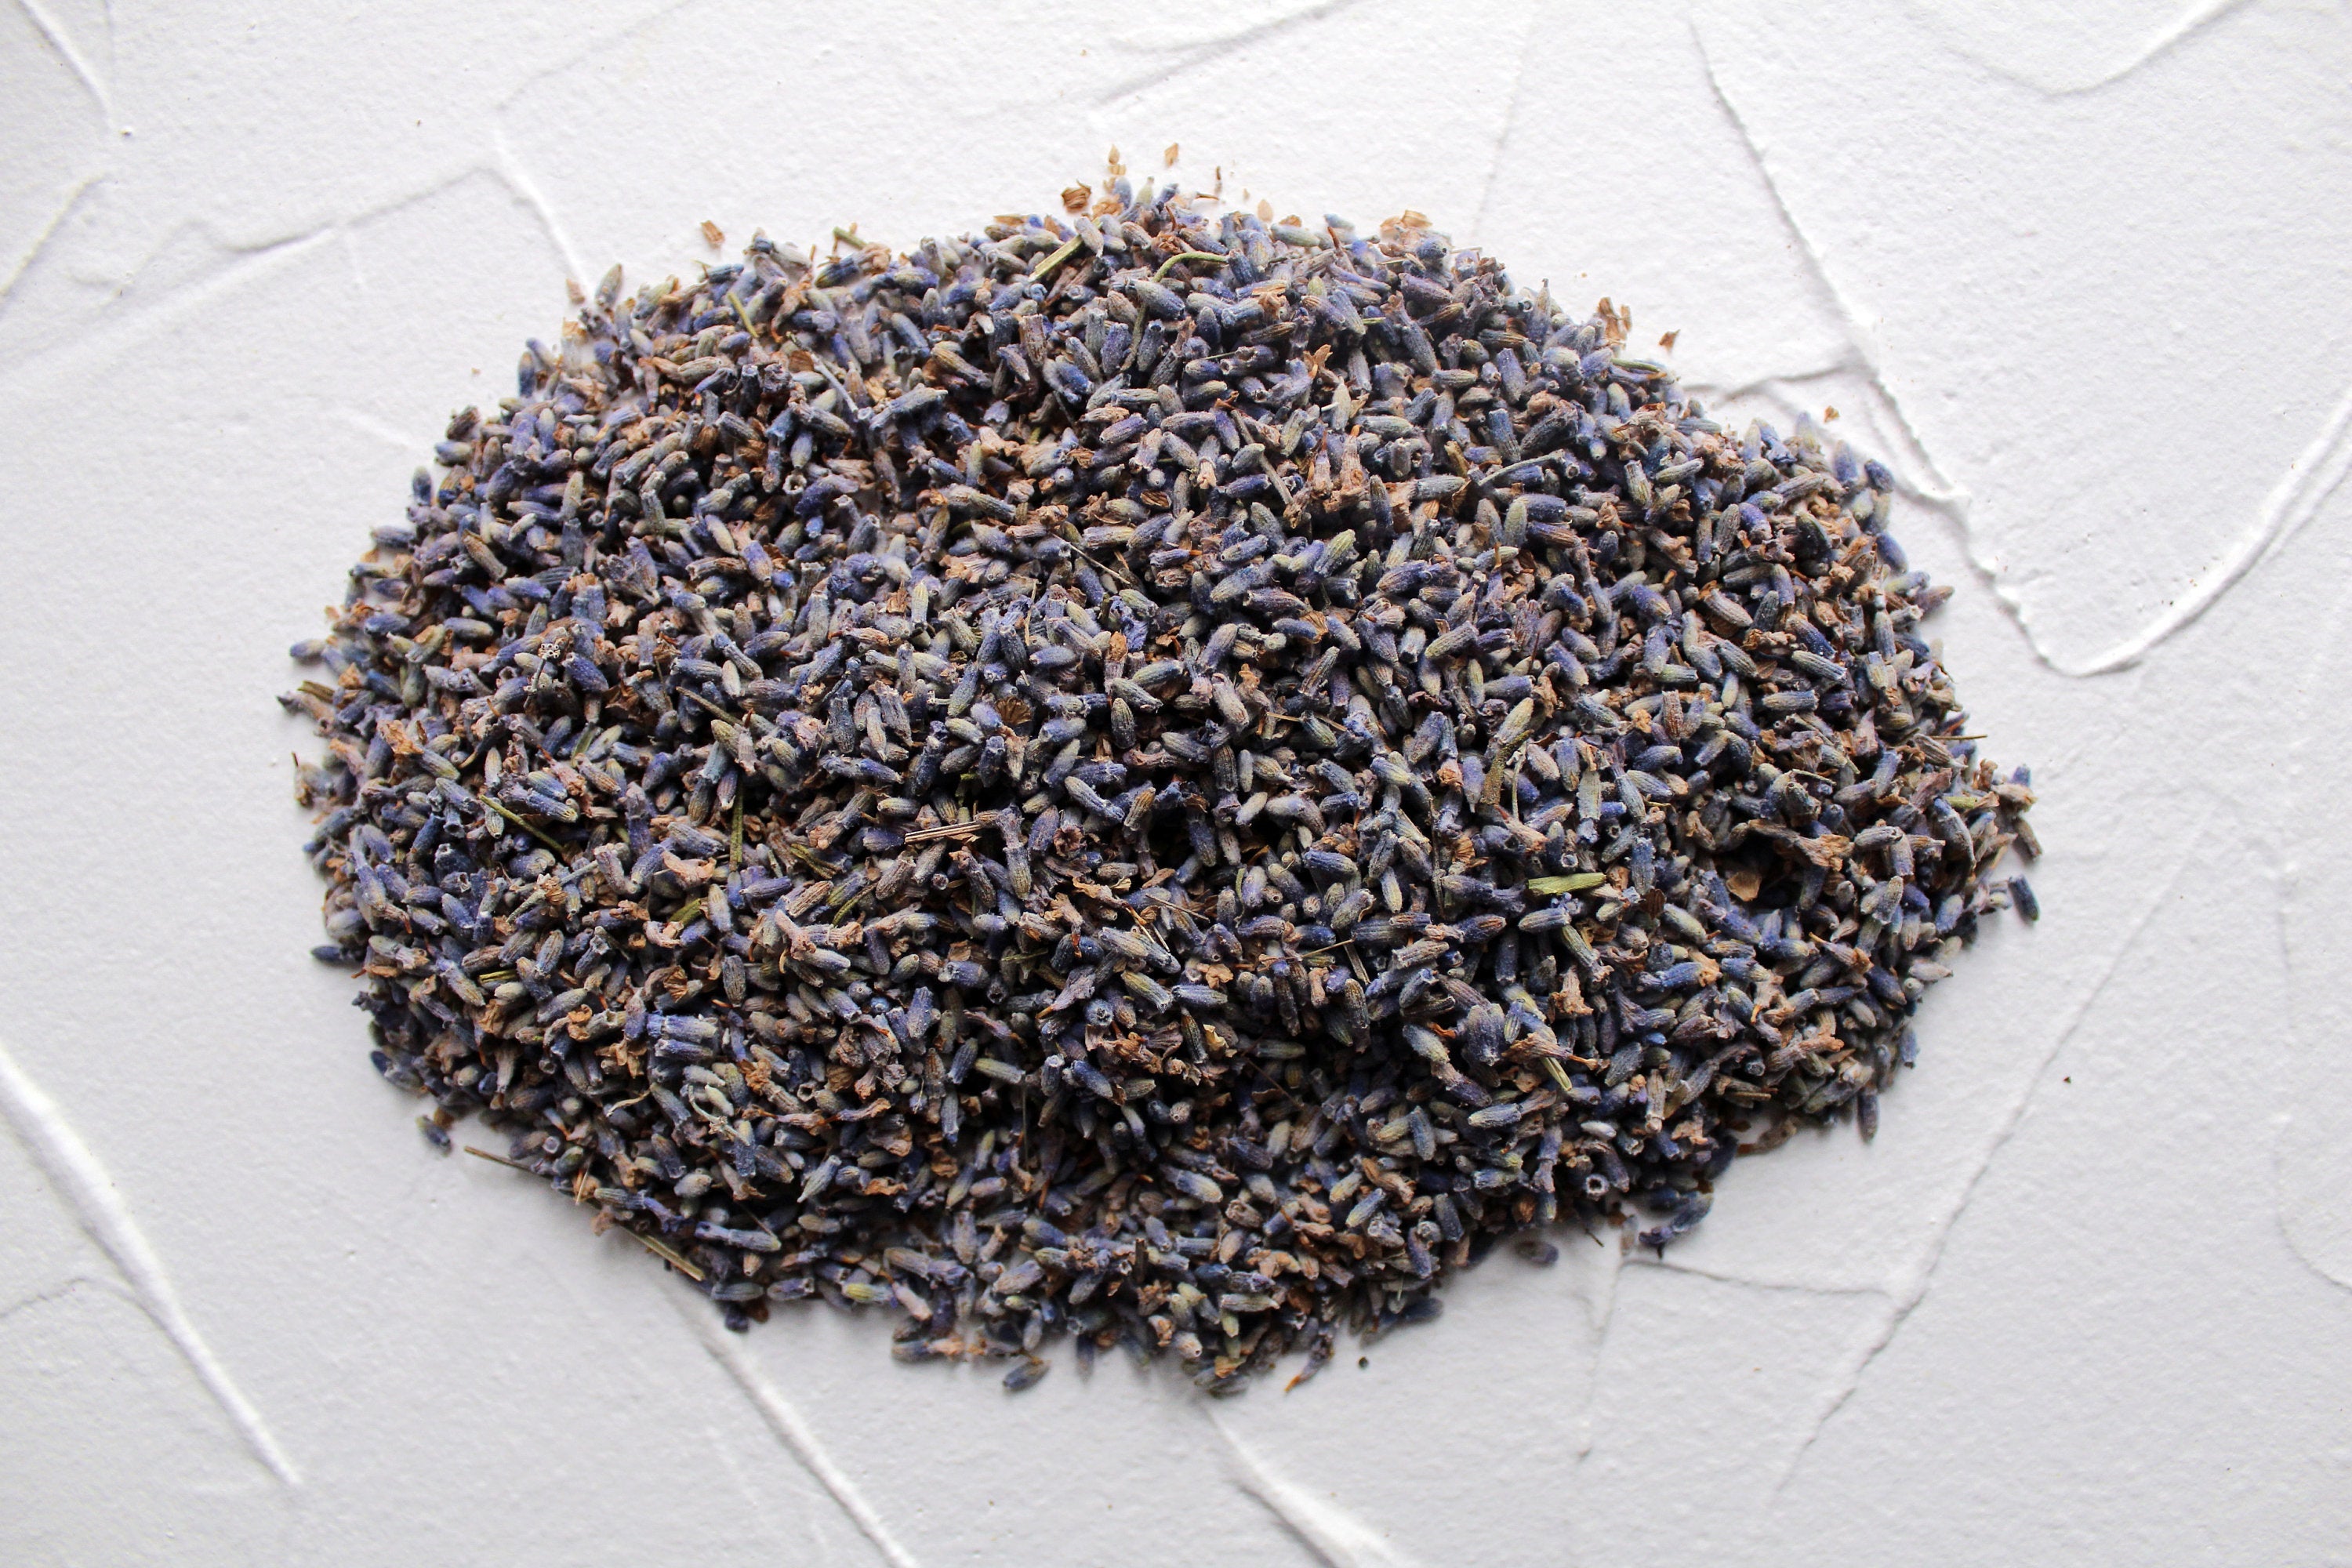 250 grams of Blue Lavender flowers, High Quality, Natural, Organic, Biodegradable, Wedding, Craft, Edible, Confetti, Toss, Lavender buds